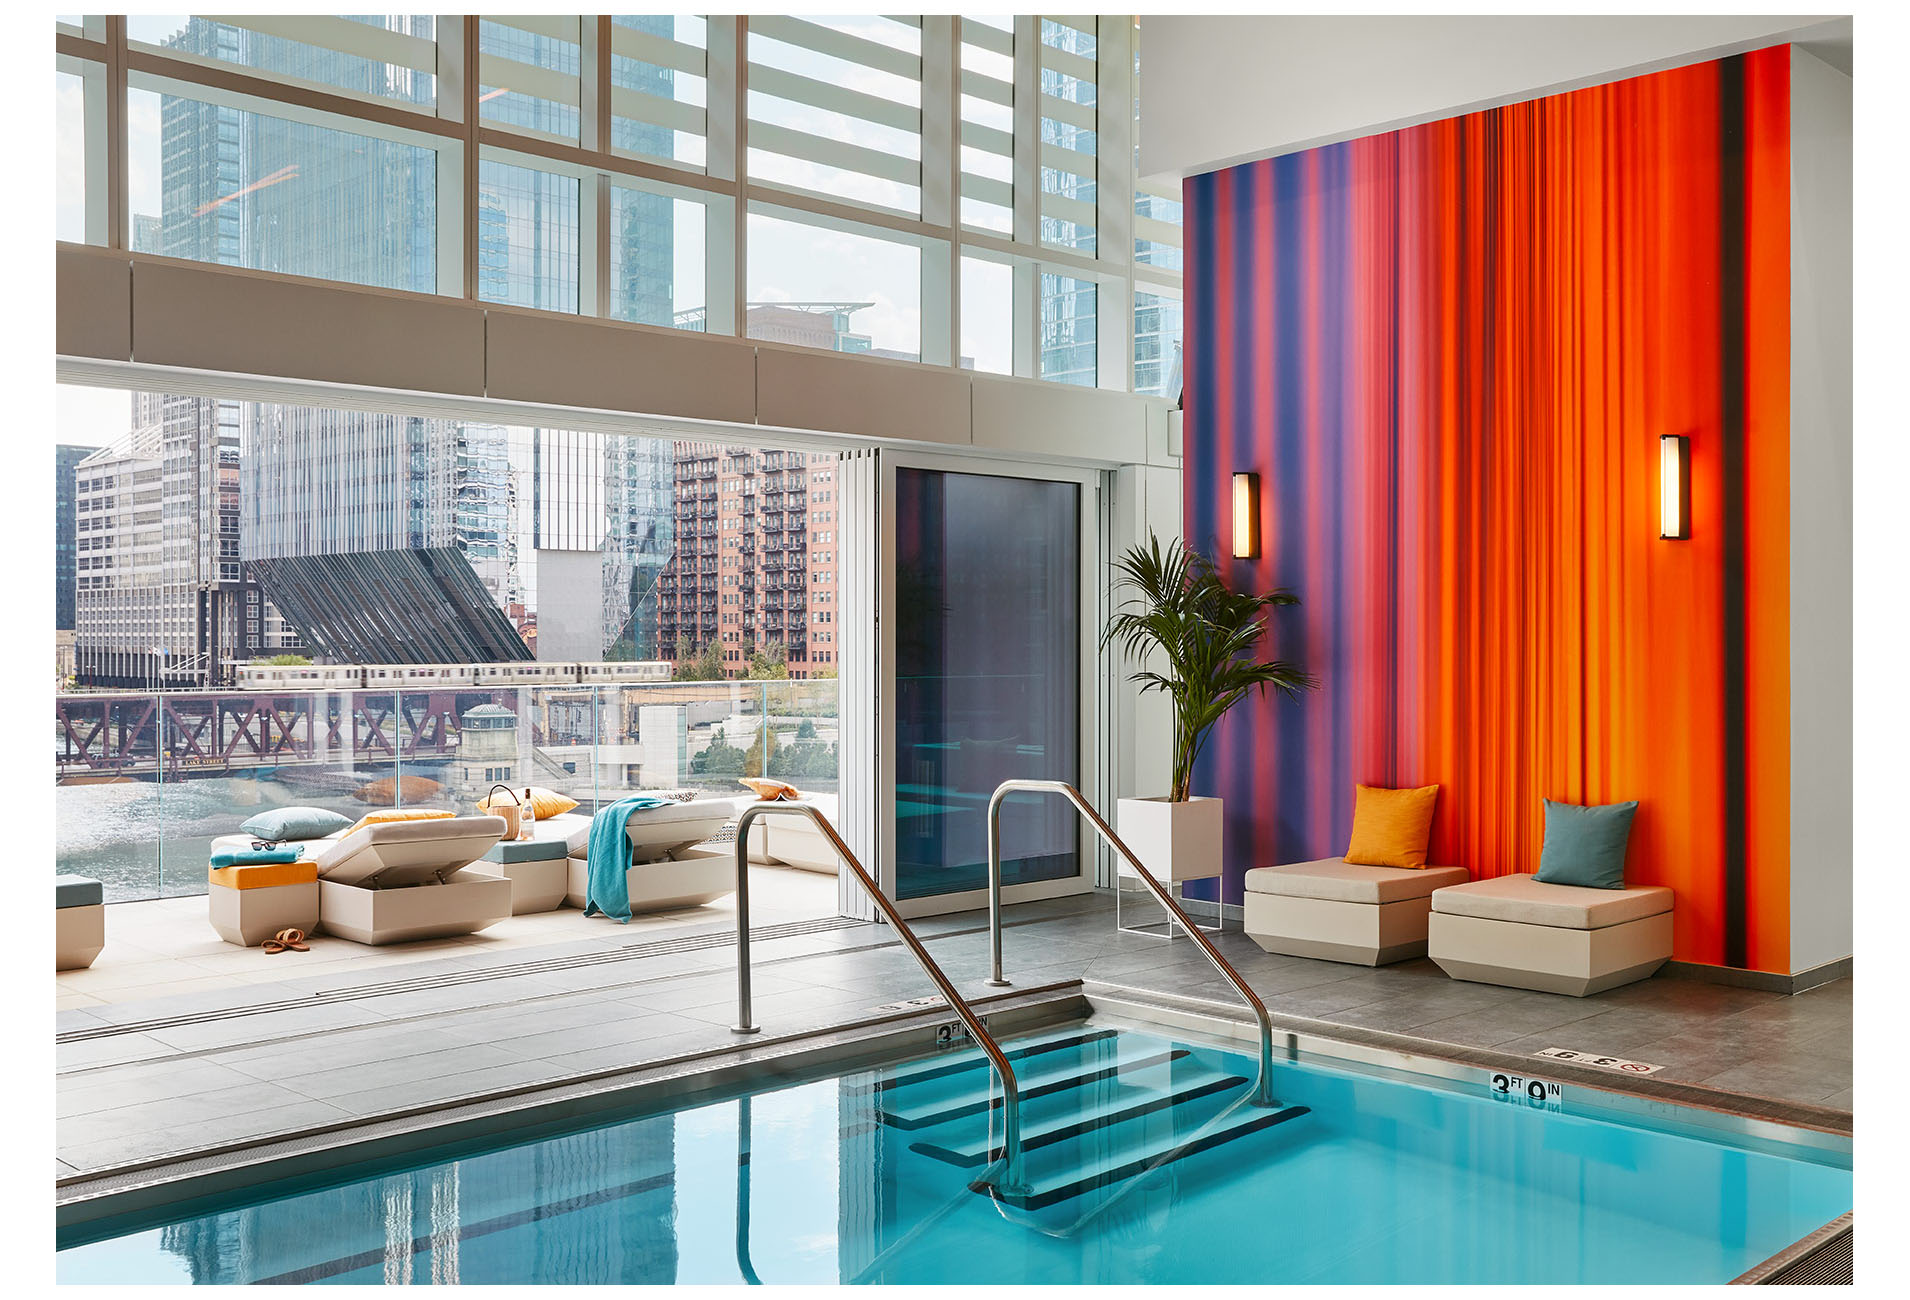 Indoor Pool Connected to the Outdoor Patio with Colorful Wall Covering and Colorful Lounge Chairs